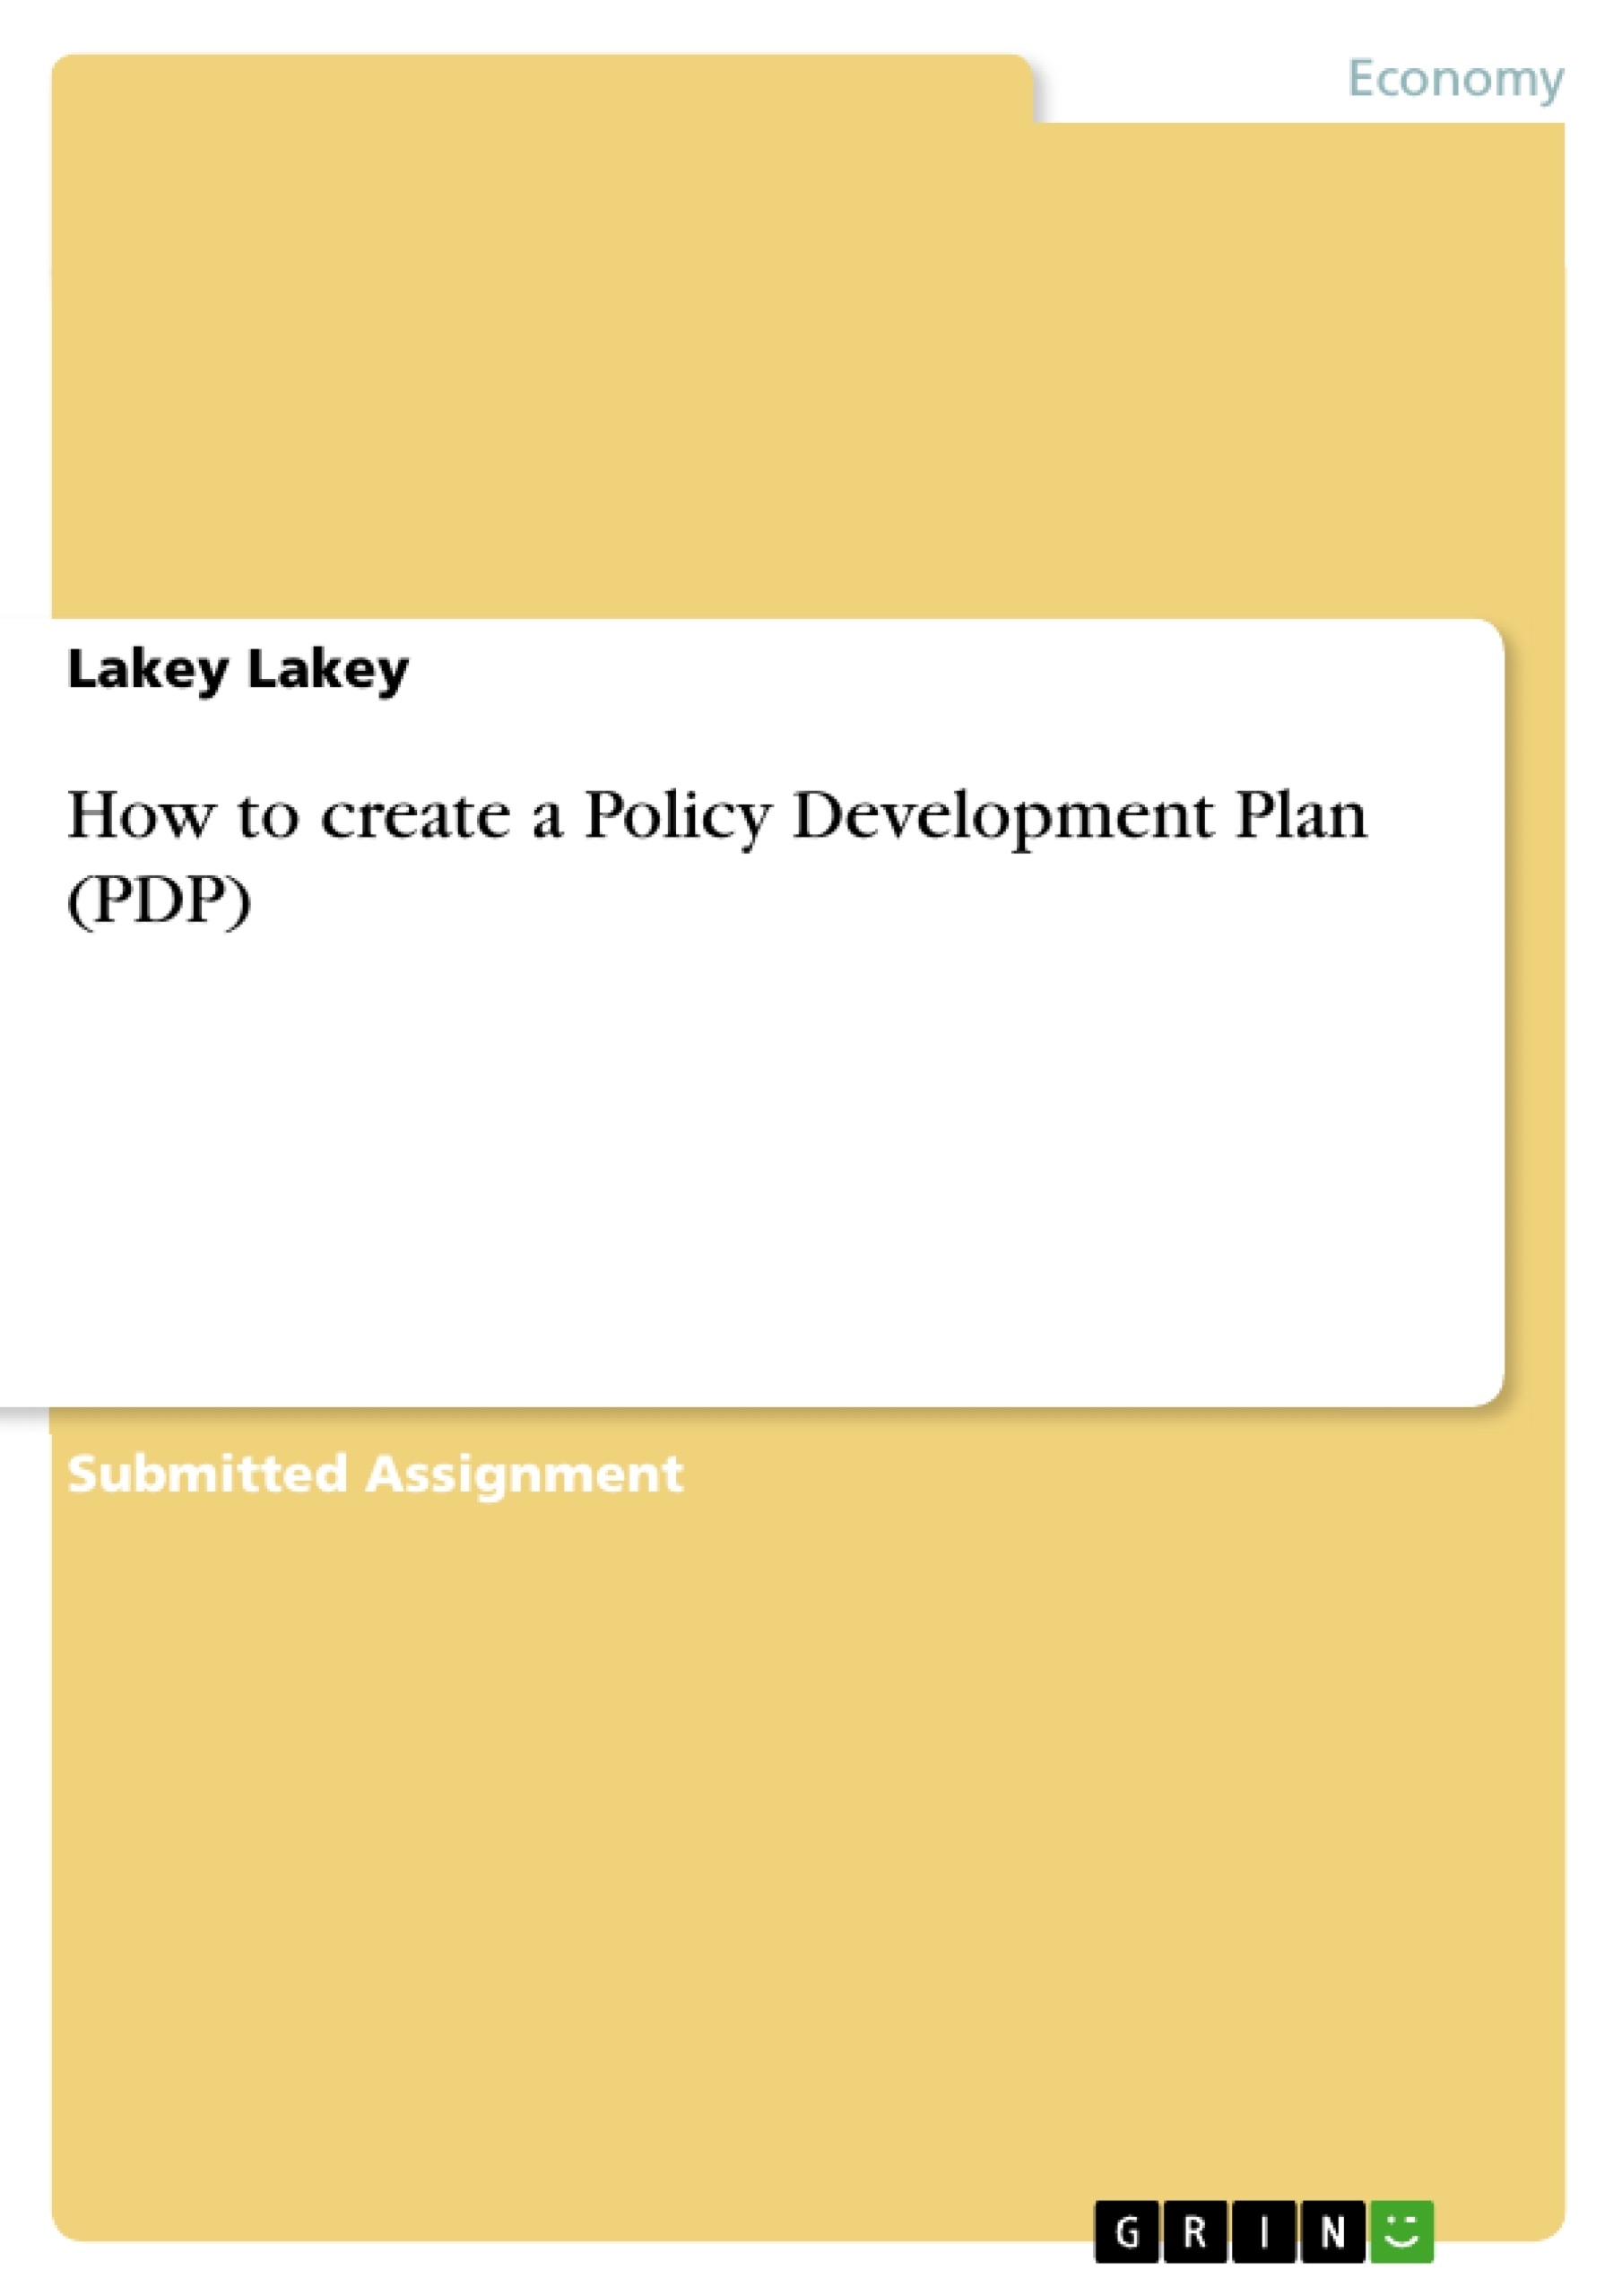 Título: How to create a Policy Development Plan (PDP)